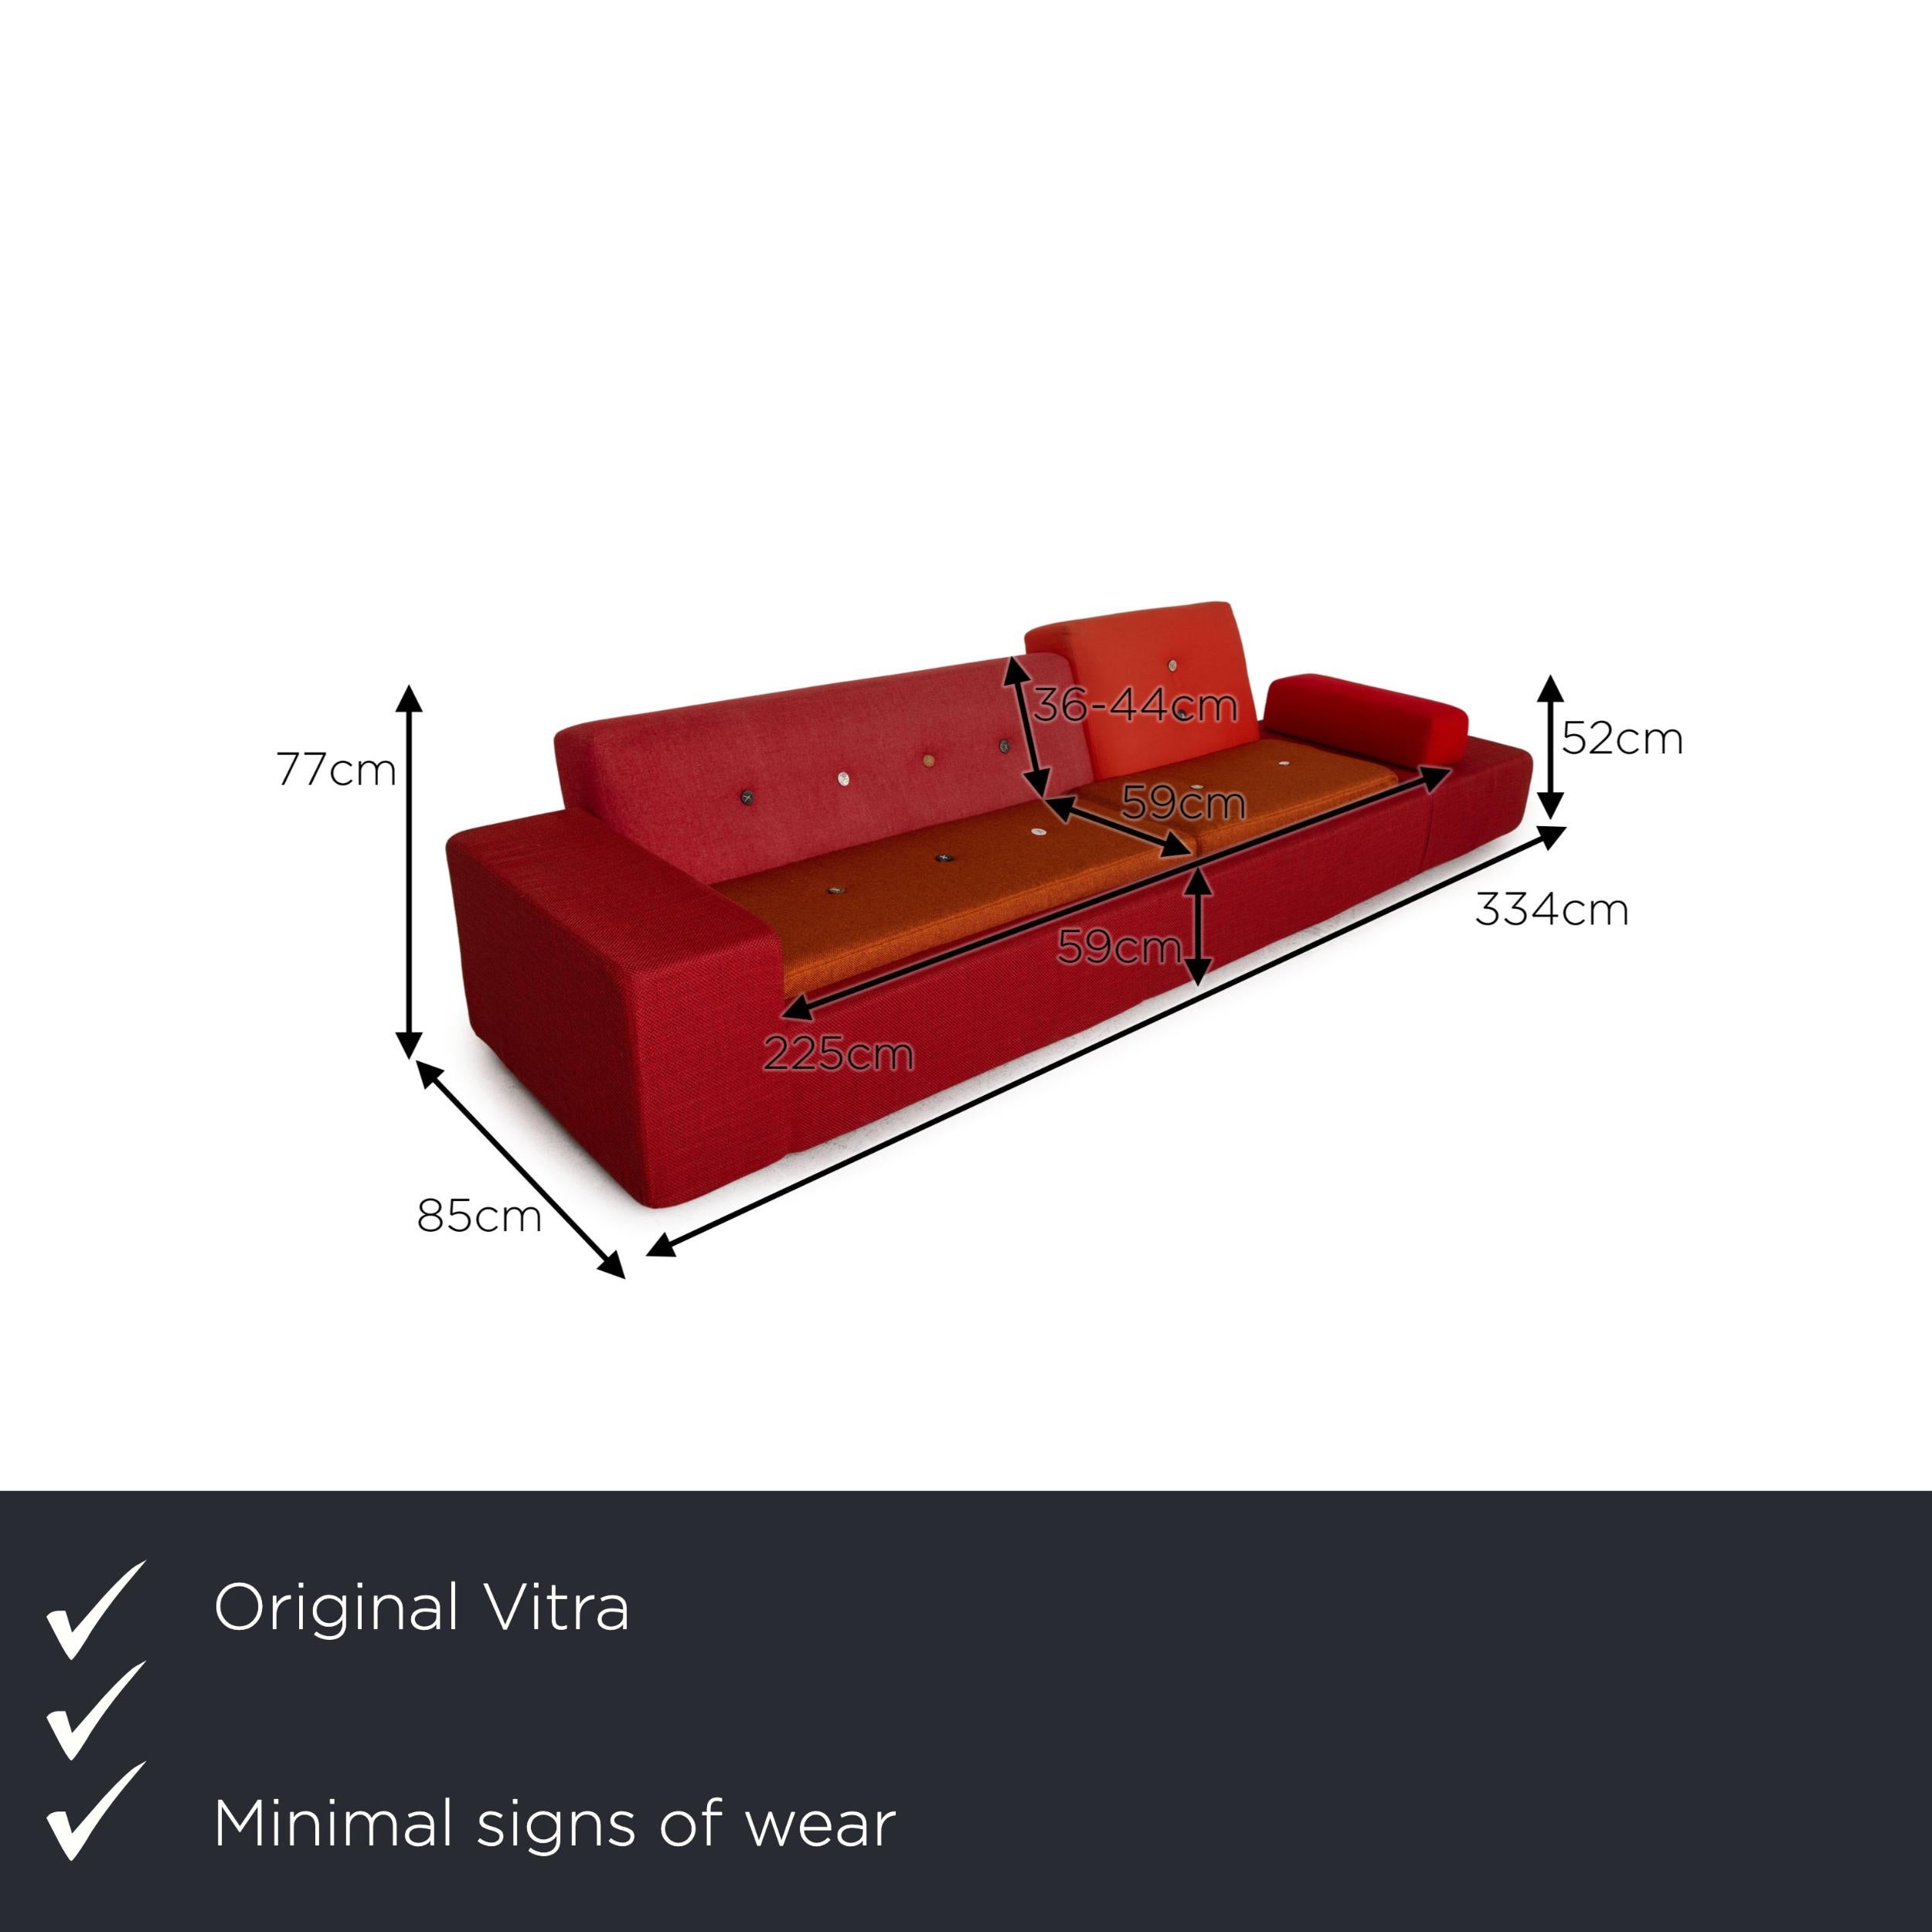 We present to you a Vitra Polder fabric sofa red four-seater couch.

Product measurements in centimeters:

Depth: 85
Width: 334
Height: 77
Seat height: 38
Rest height: 52
Seat depth: 59
Seat width: 225
Back height: 36.

    